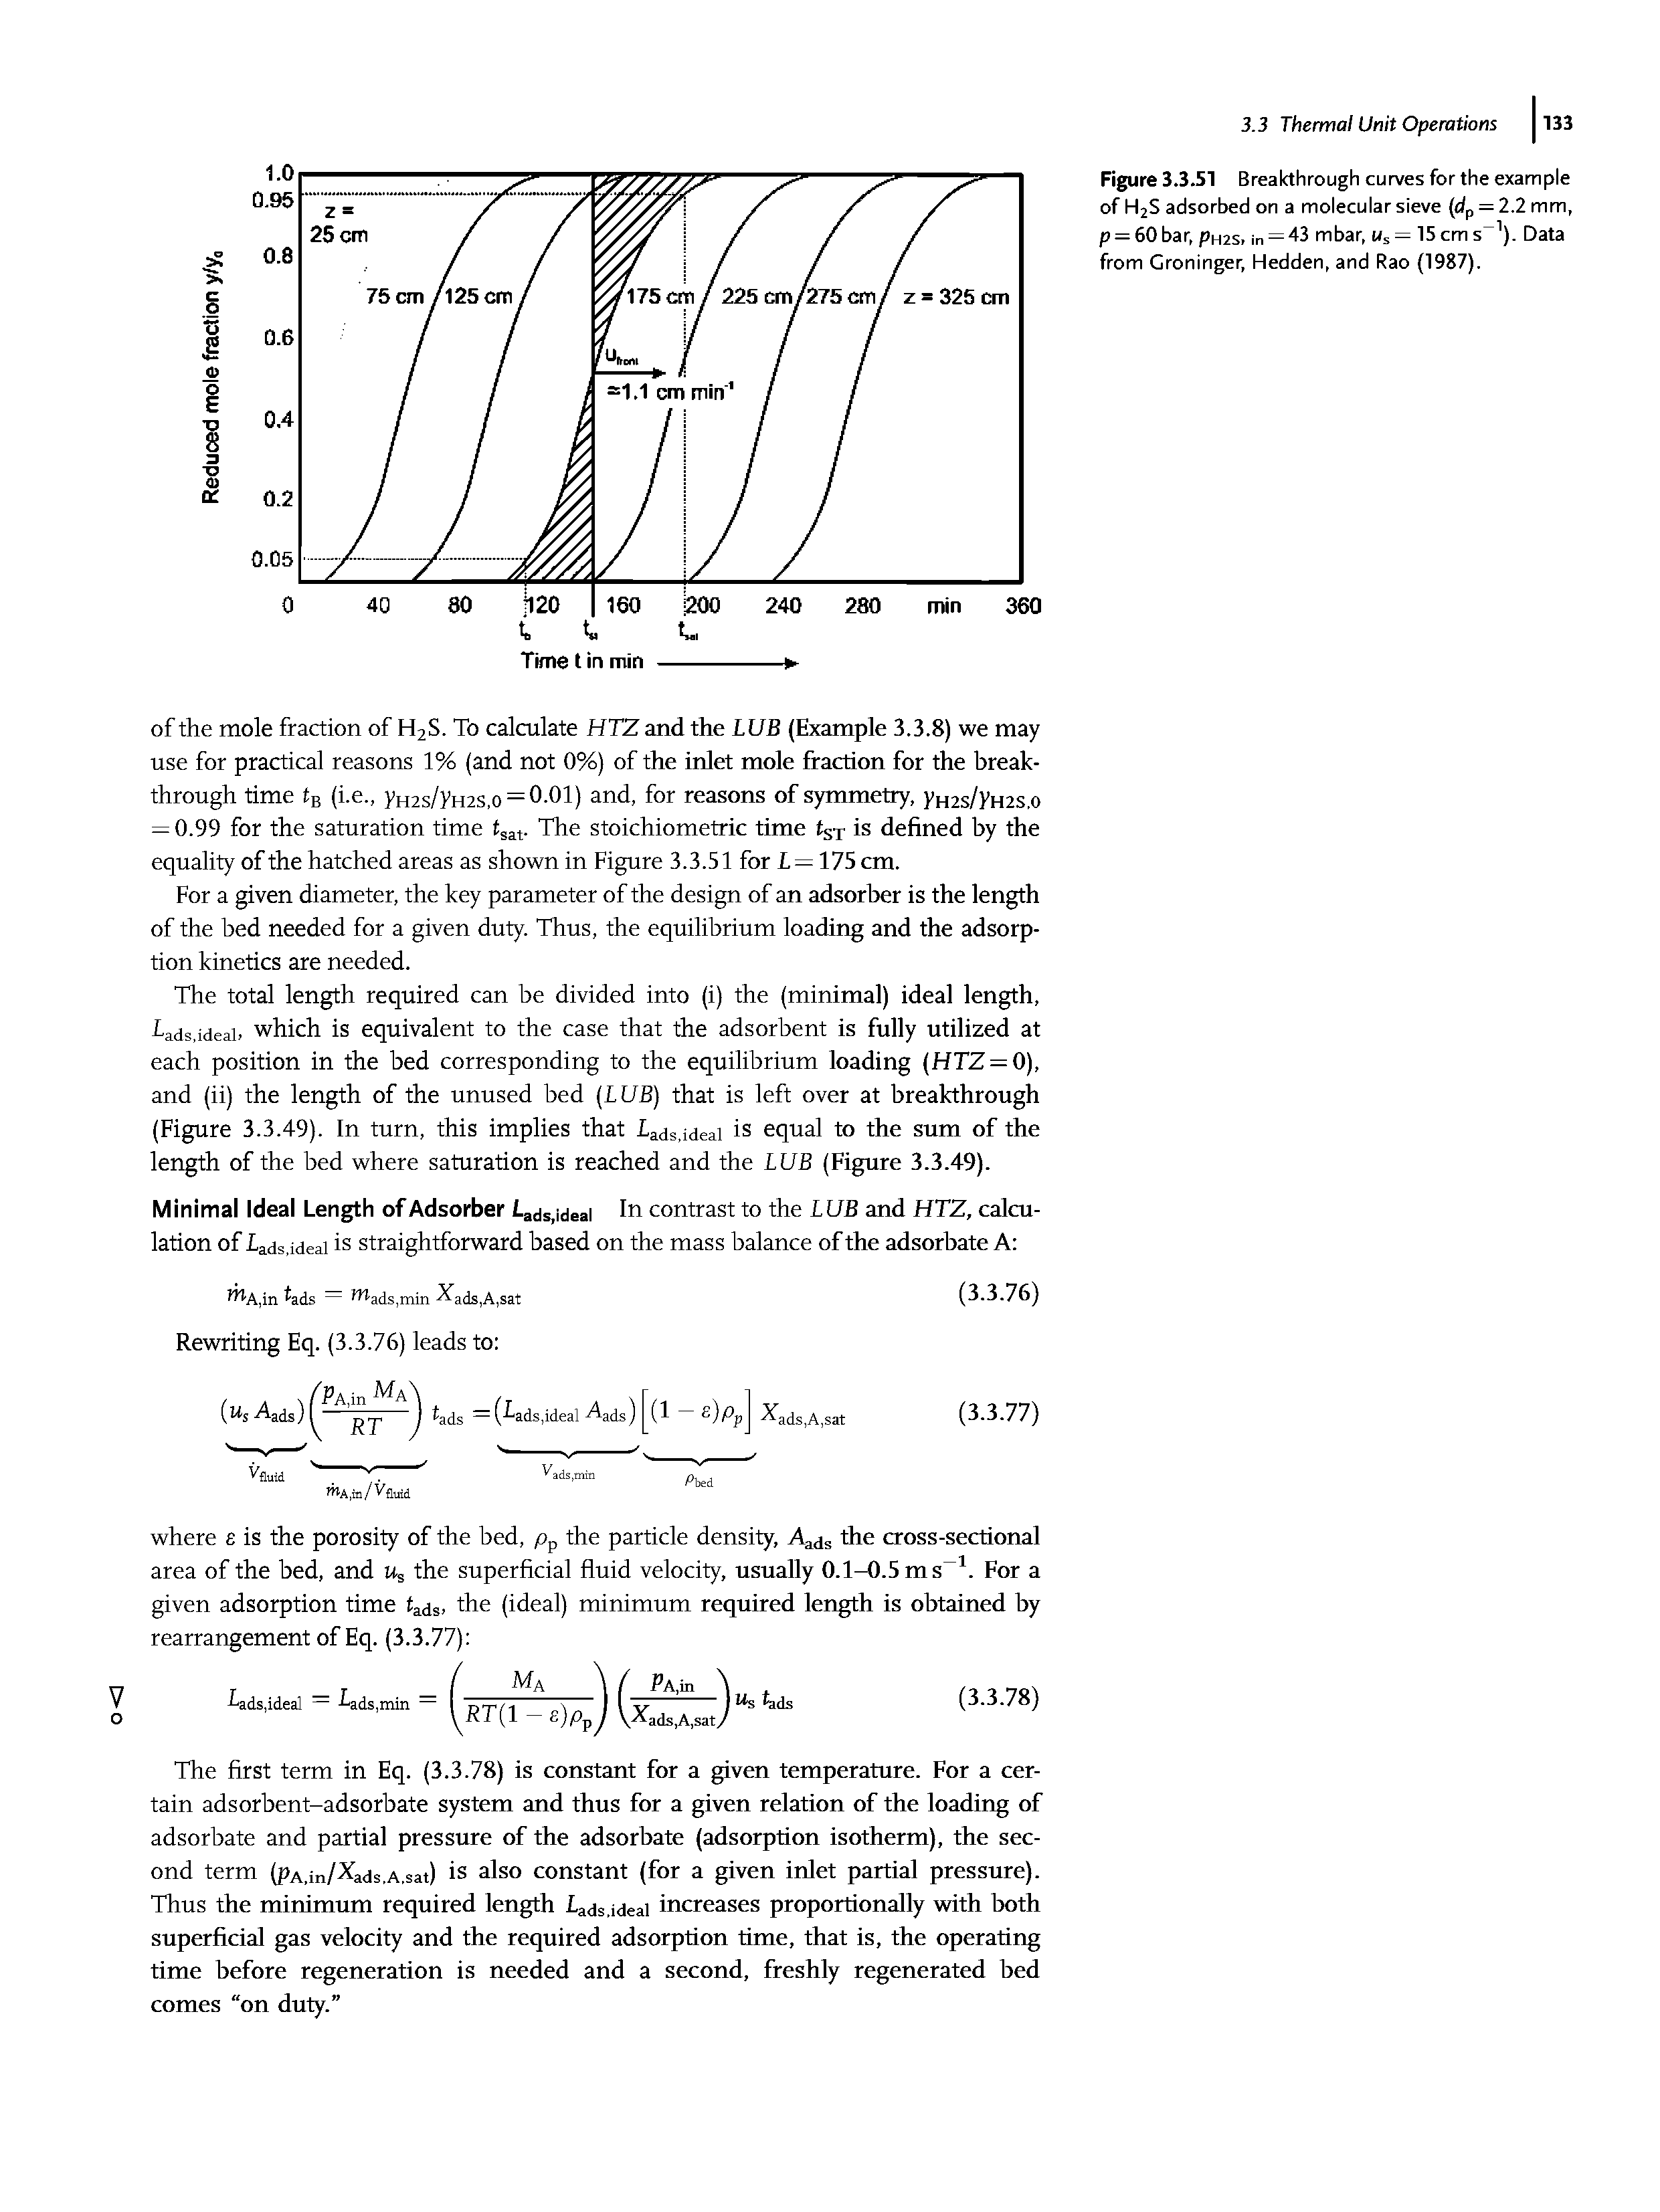 Figure 3.3.51 Breakthrough curves for the example of H2S adsorbed on a molecular sieve dp = 2.2 mm, p = 60 bar, Ph2s, in = 43 mbar, Us = 15 cm s ). Data from Croninger, Hedden, and Rao (1987).